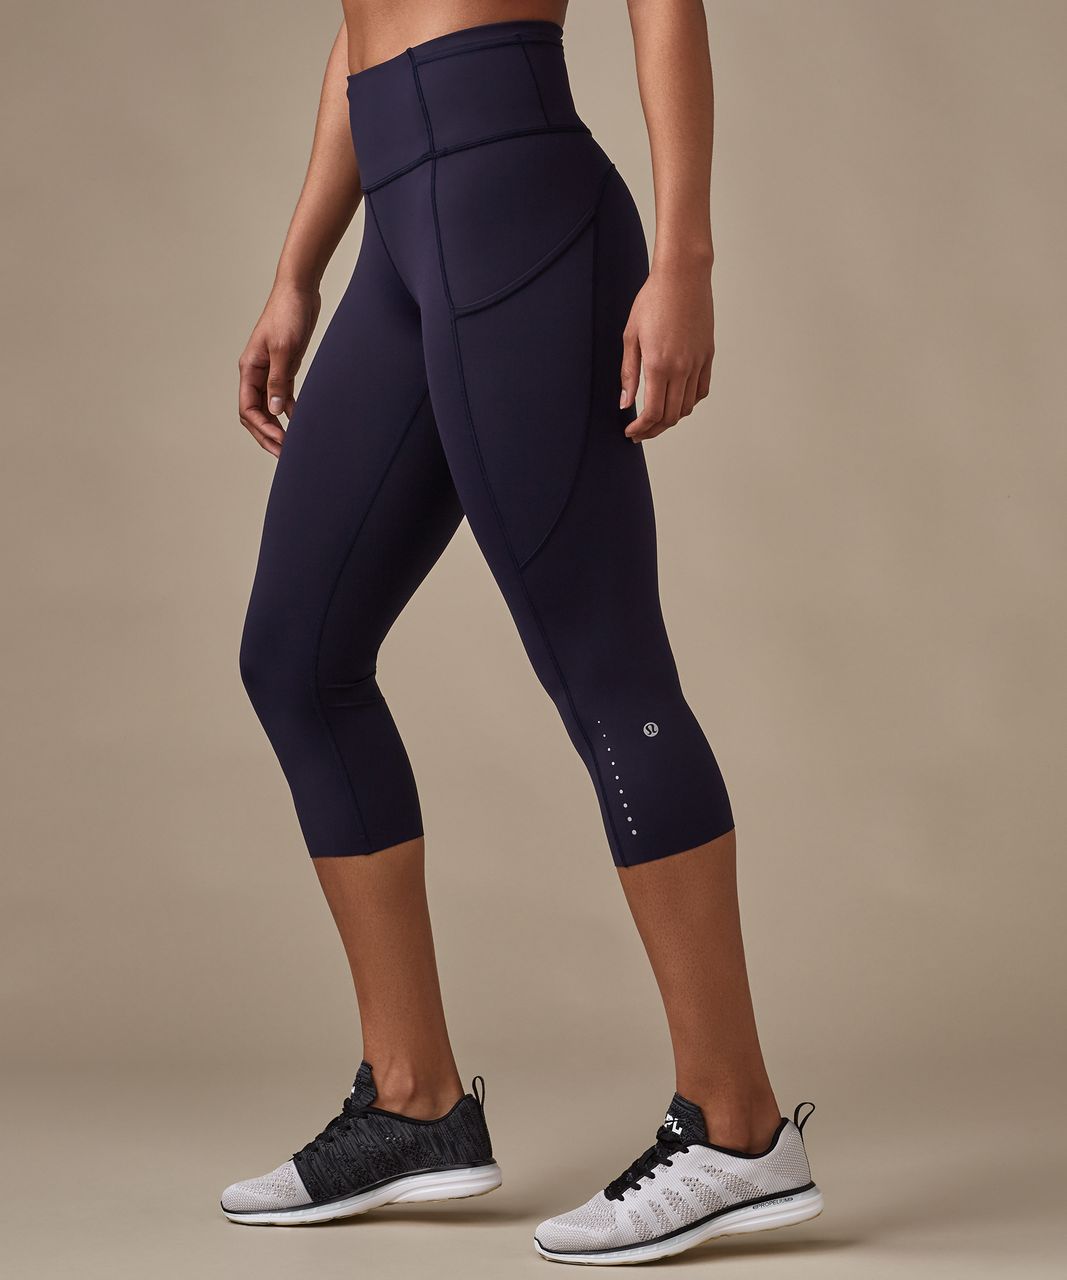 lululemon - Fast and Free High-Rise Crop 19 Reflective on